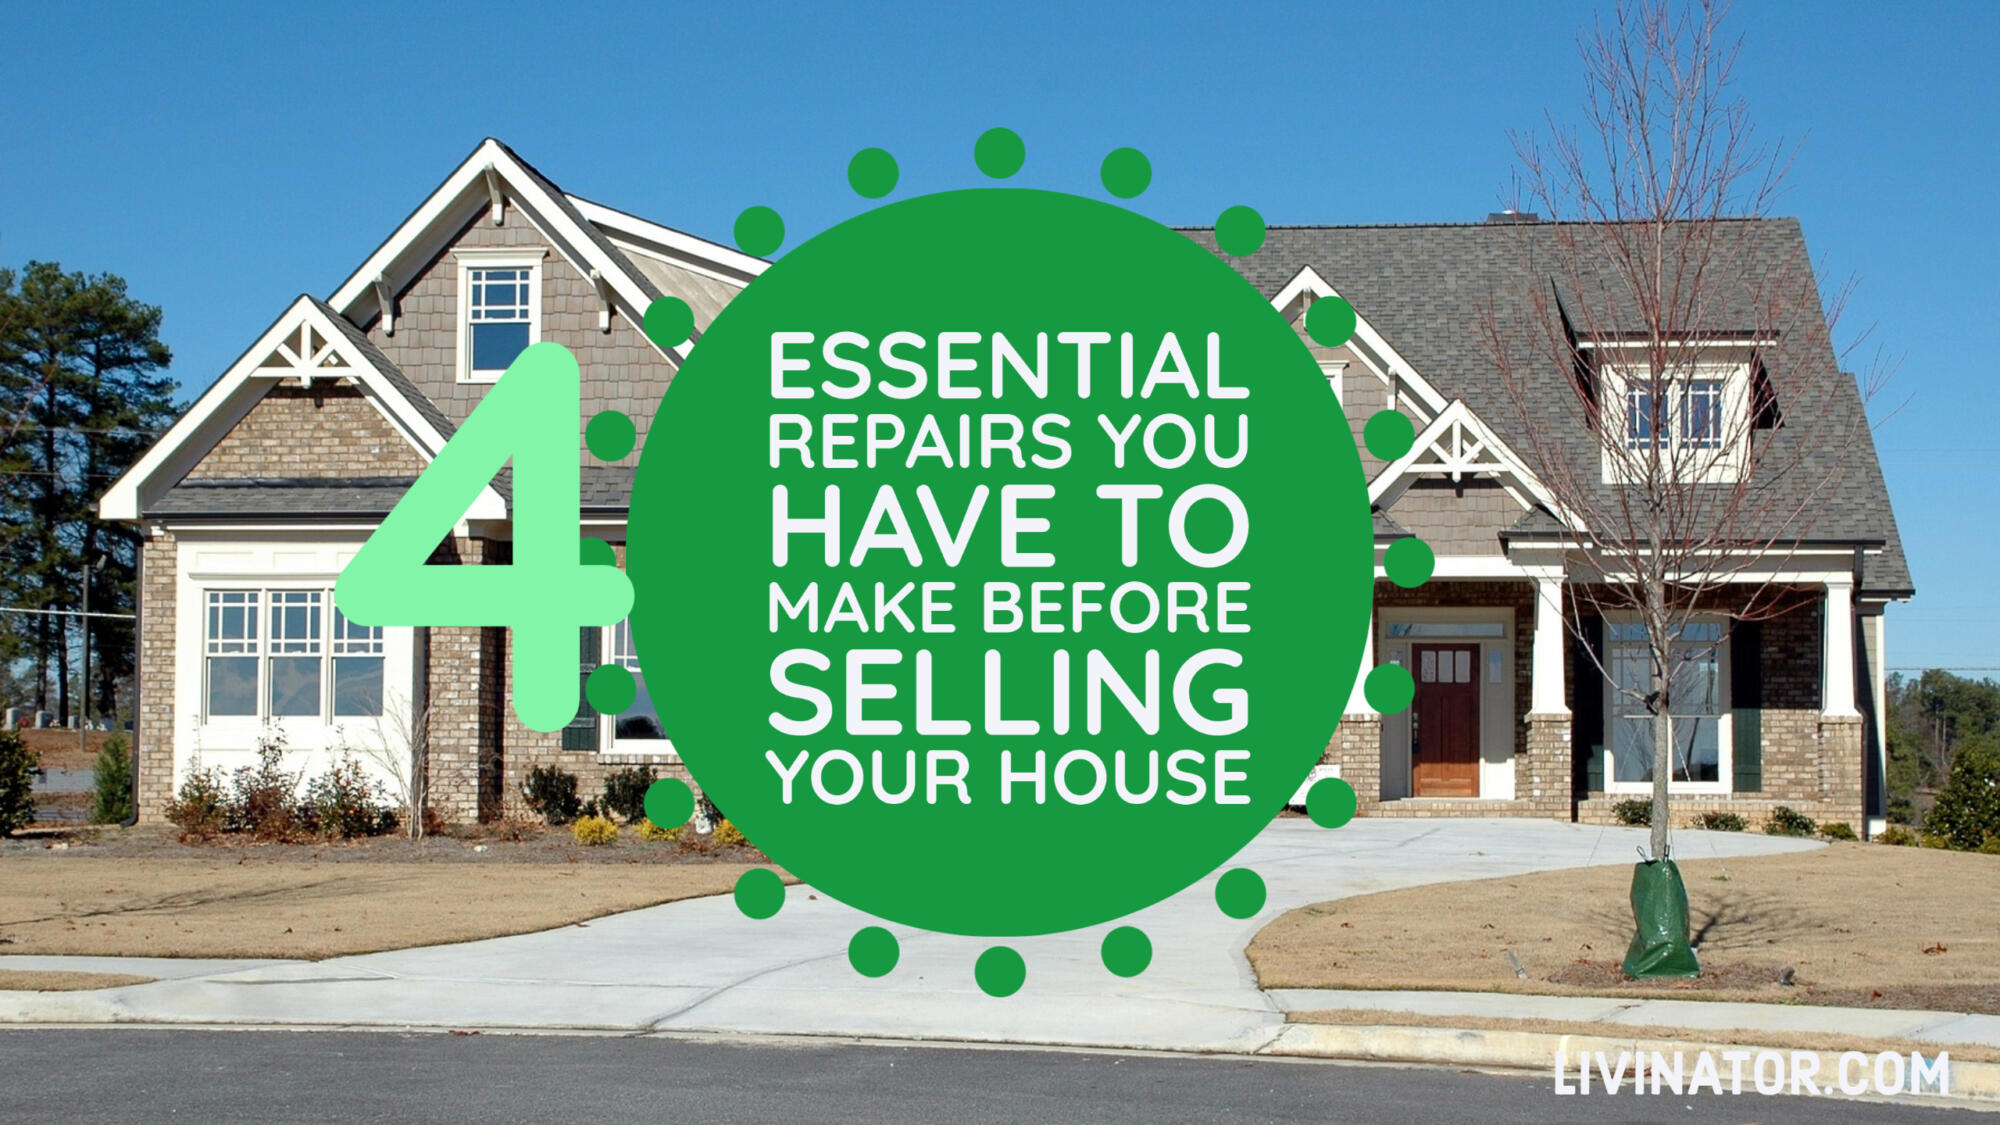 Must-make repairs before selling your house.